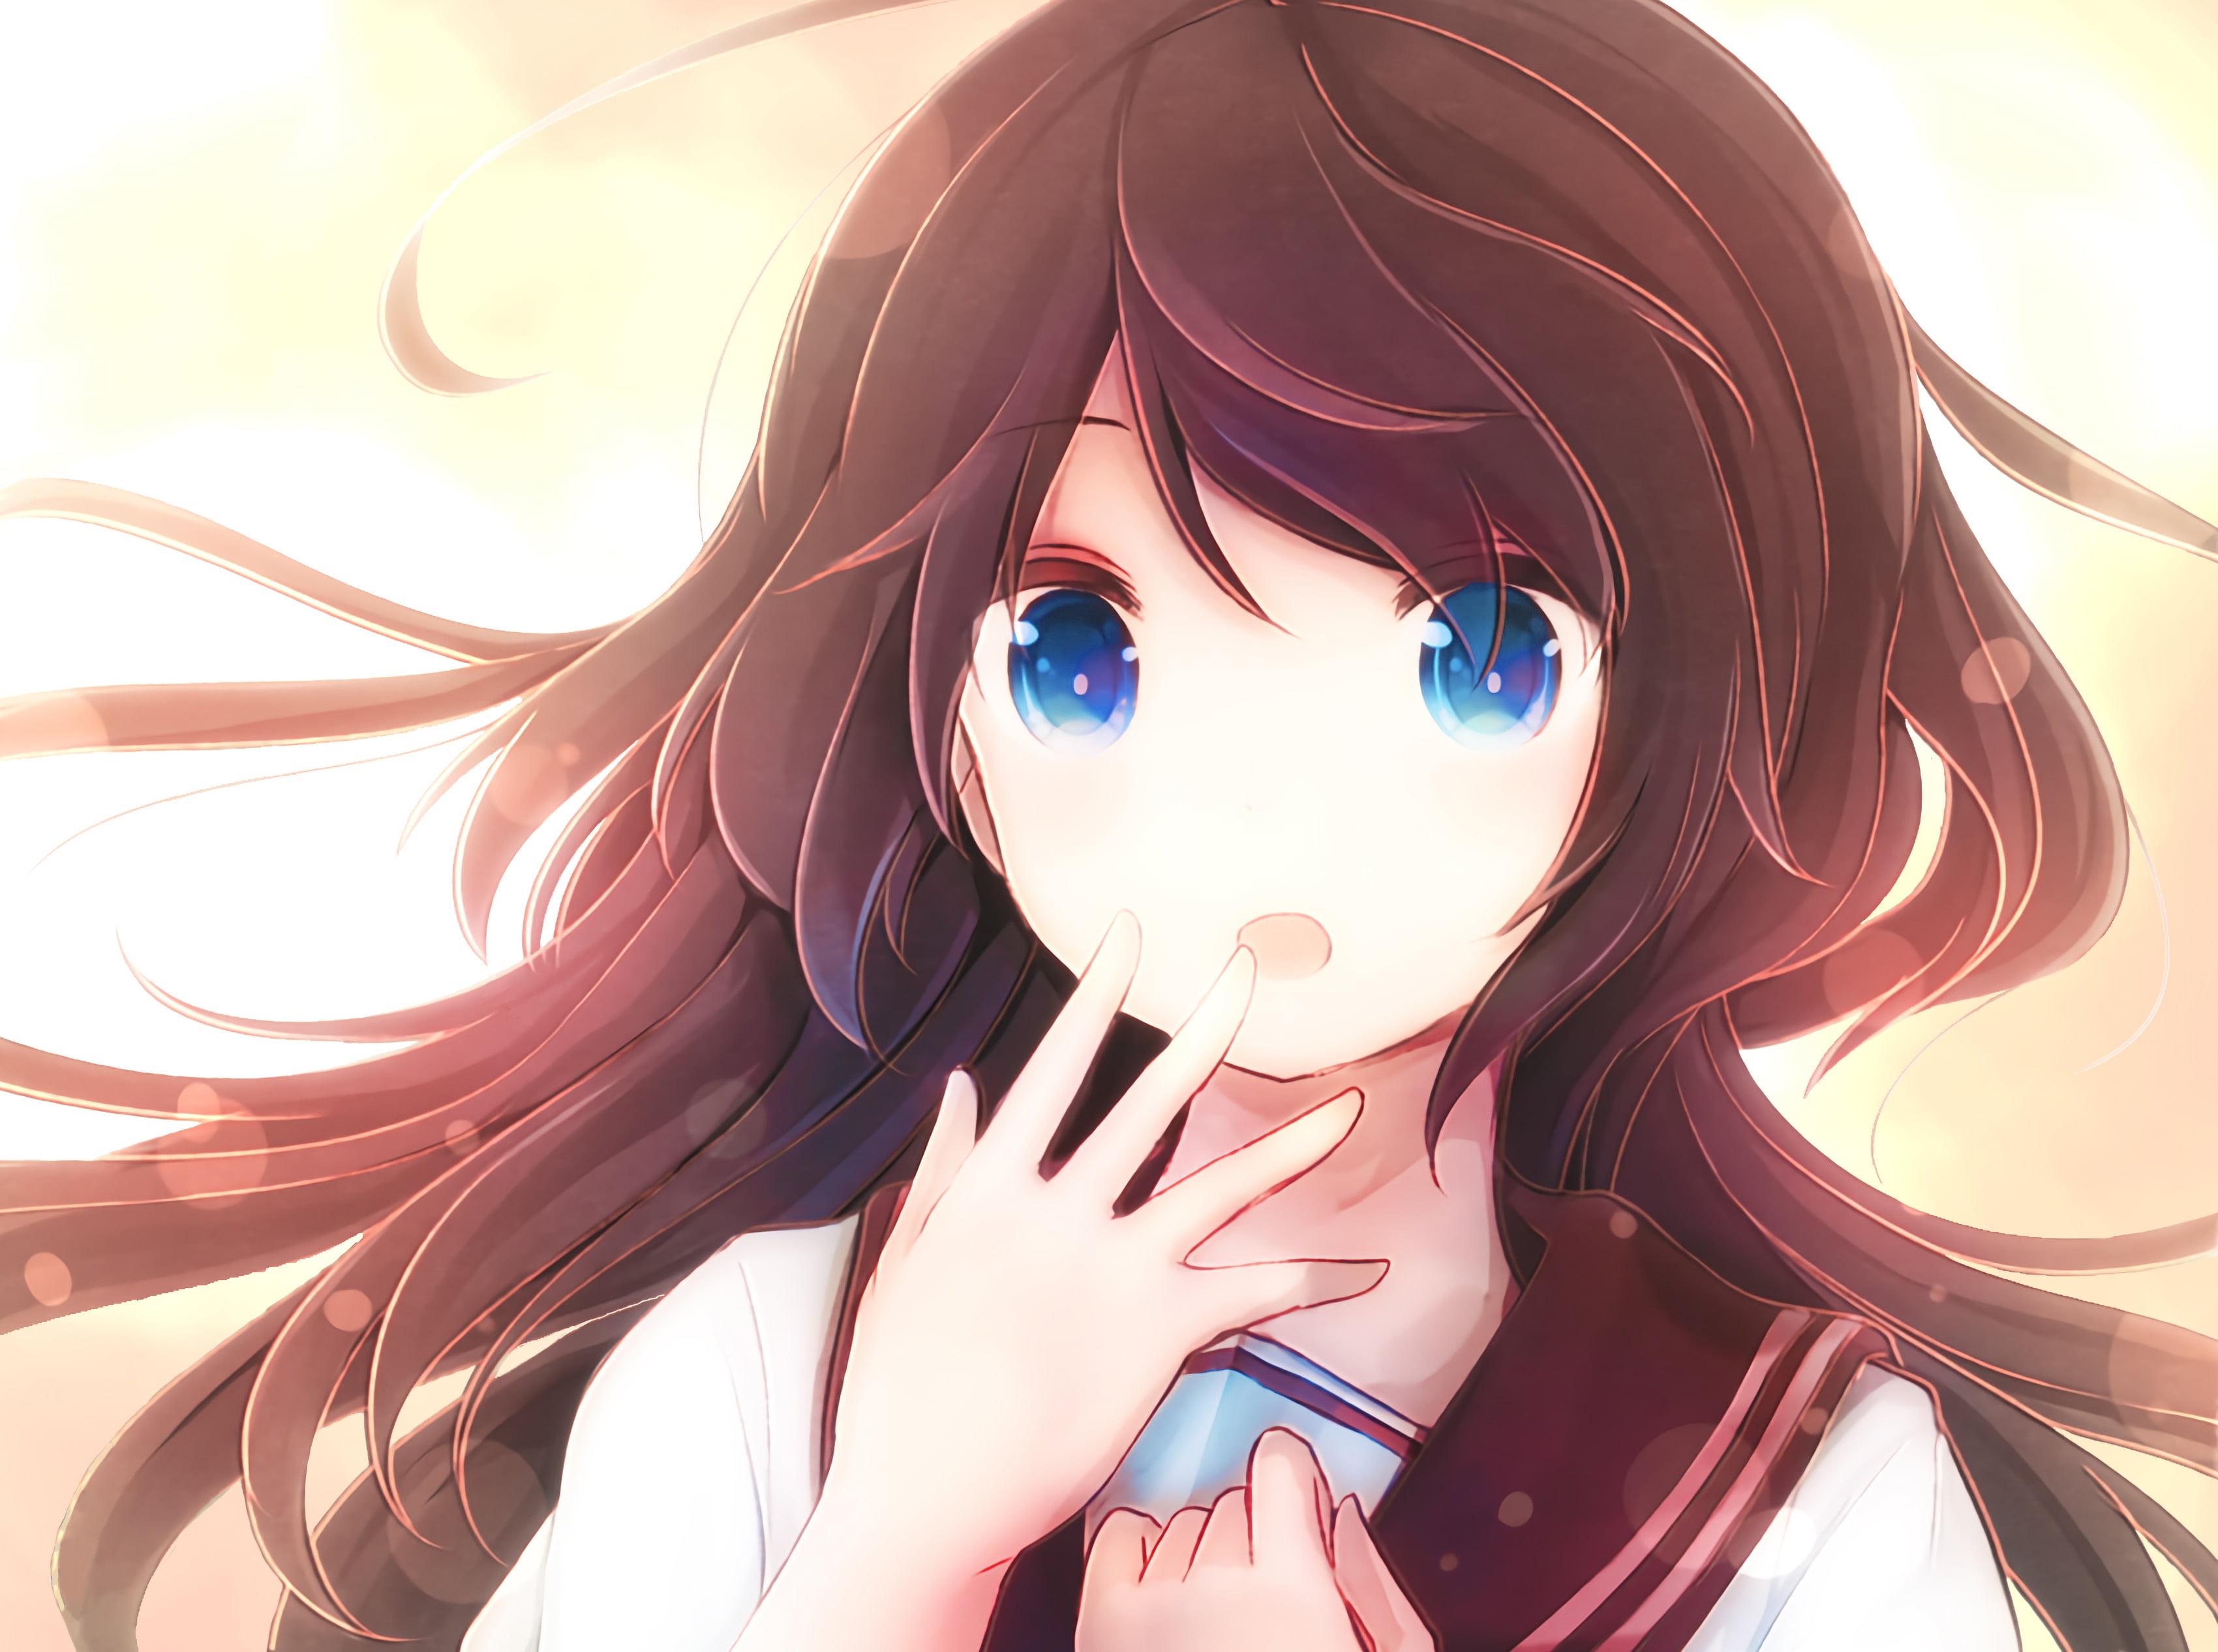 pretty anime girl with brown hair and blue eyes